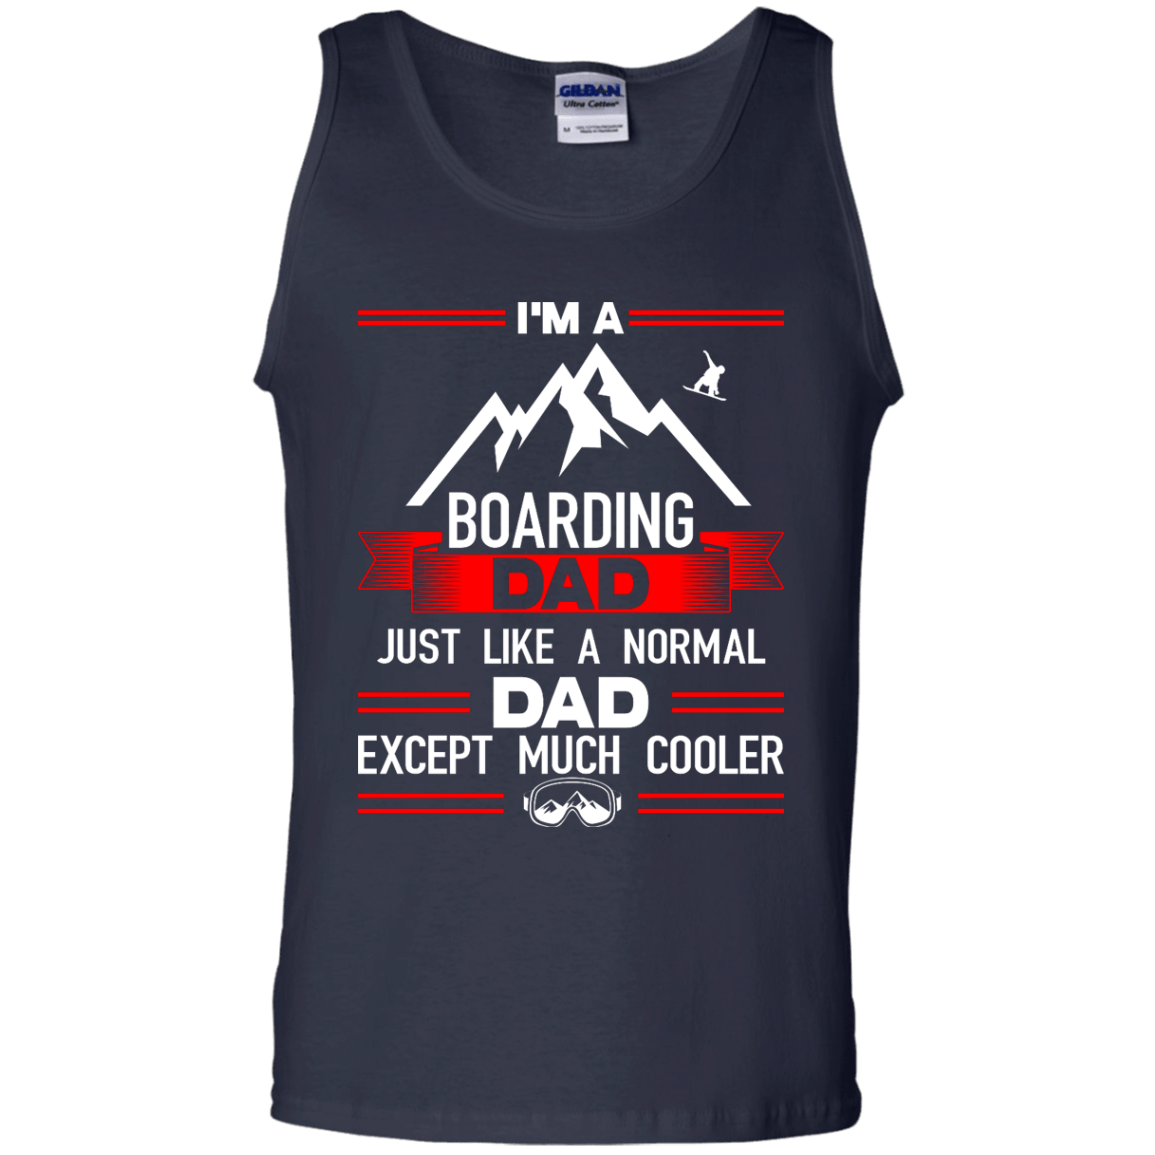 I'm A Boarding Dad Just Like A Normal Dad Except Much Cooler Tank Tops - Powderaddicts